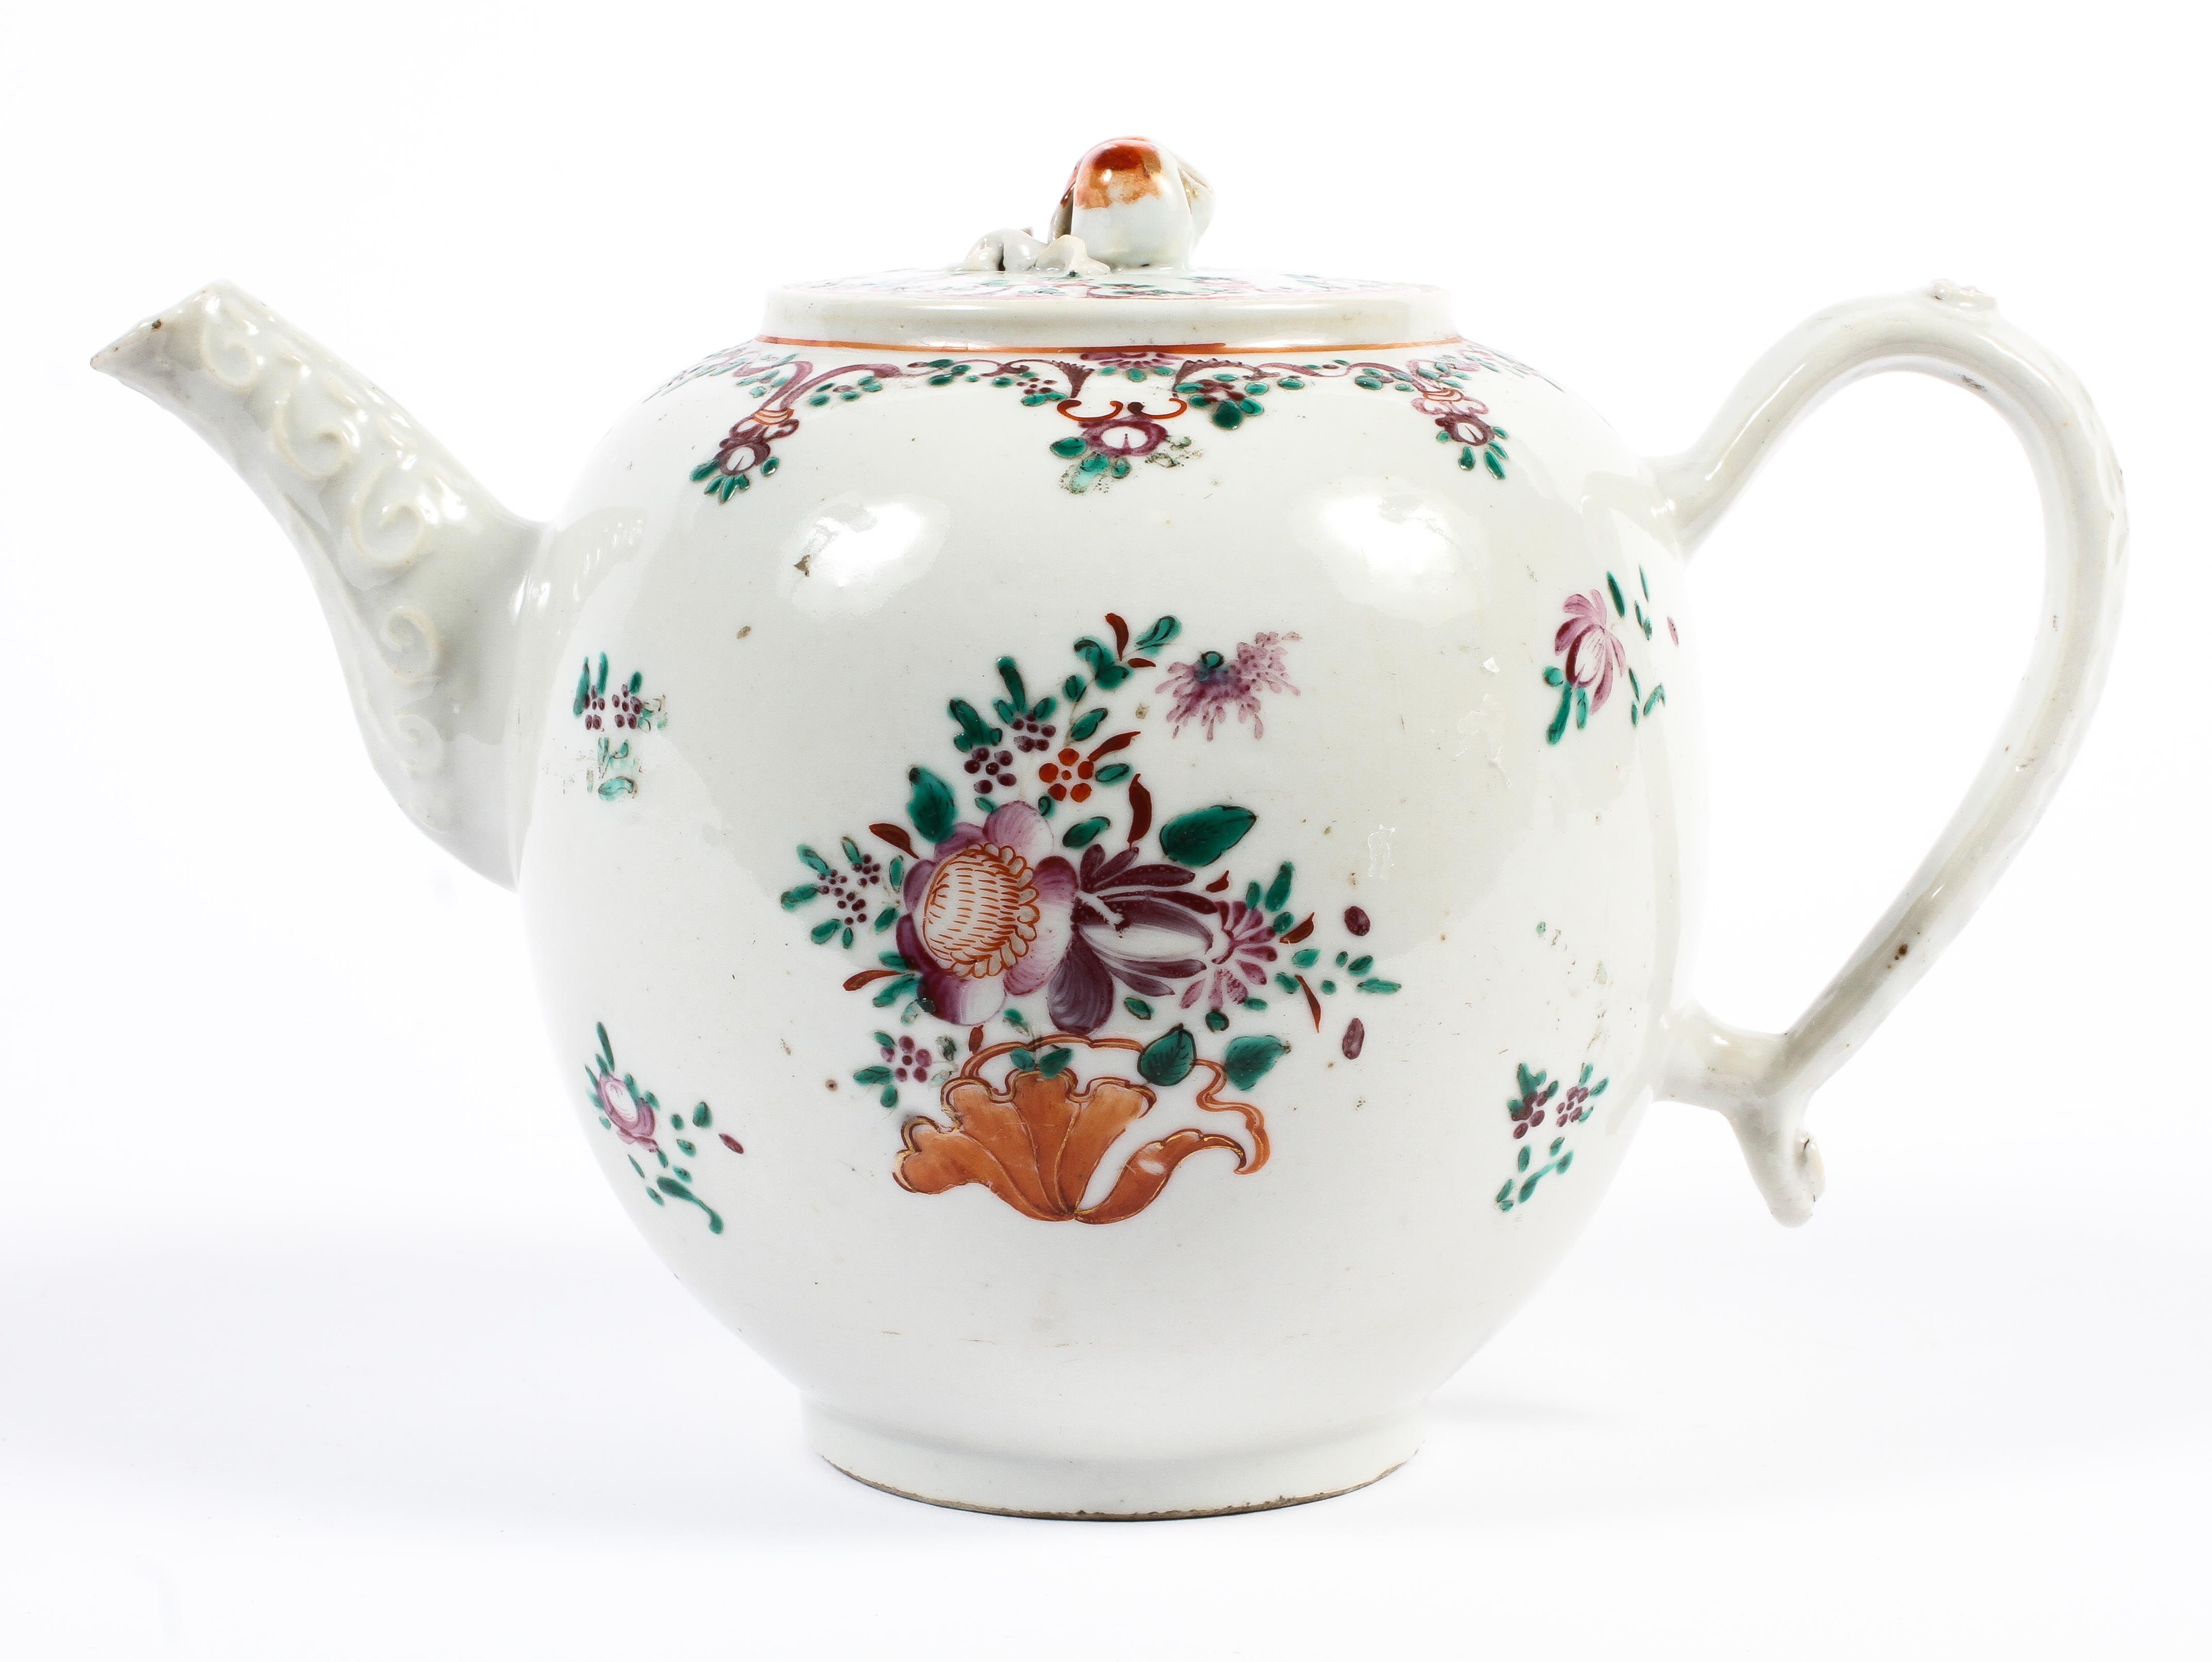 A Chinese Export globular teapot and cover, late 18th century,